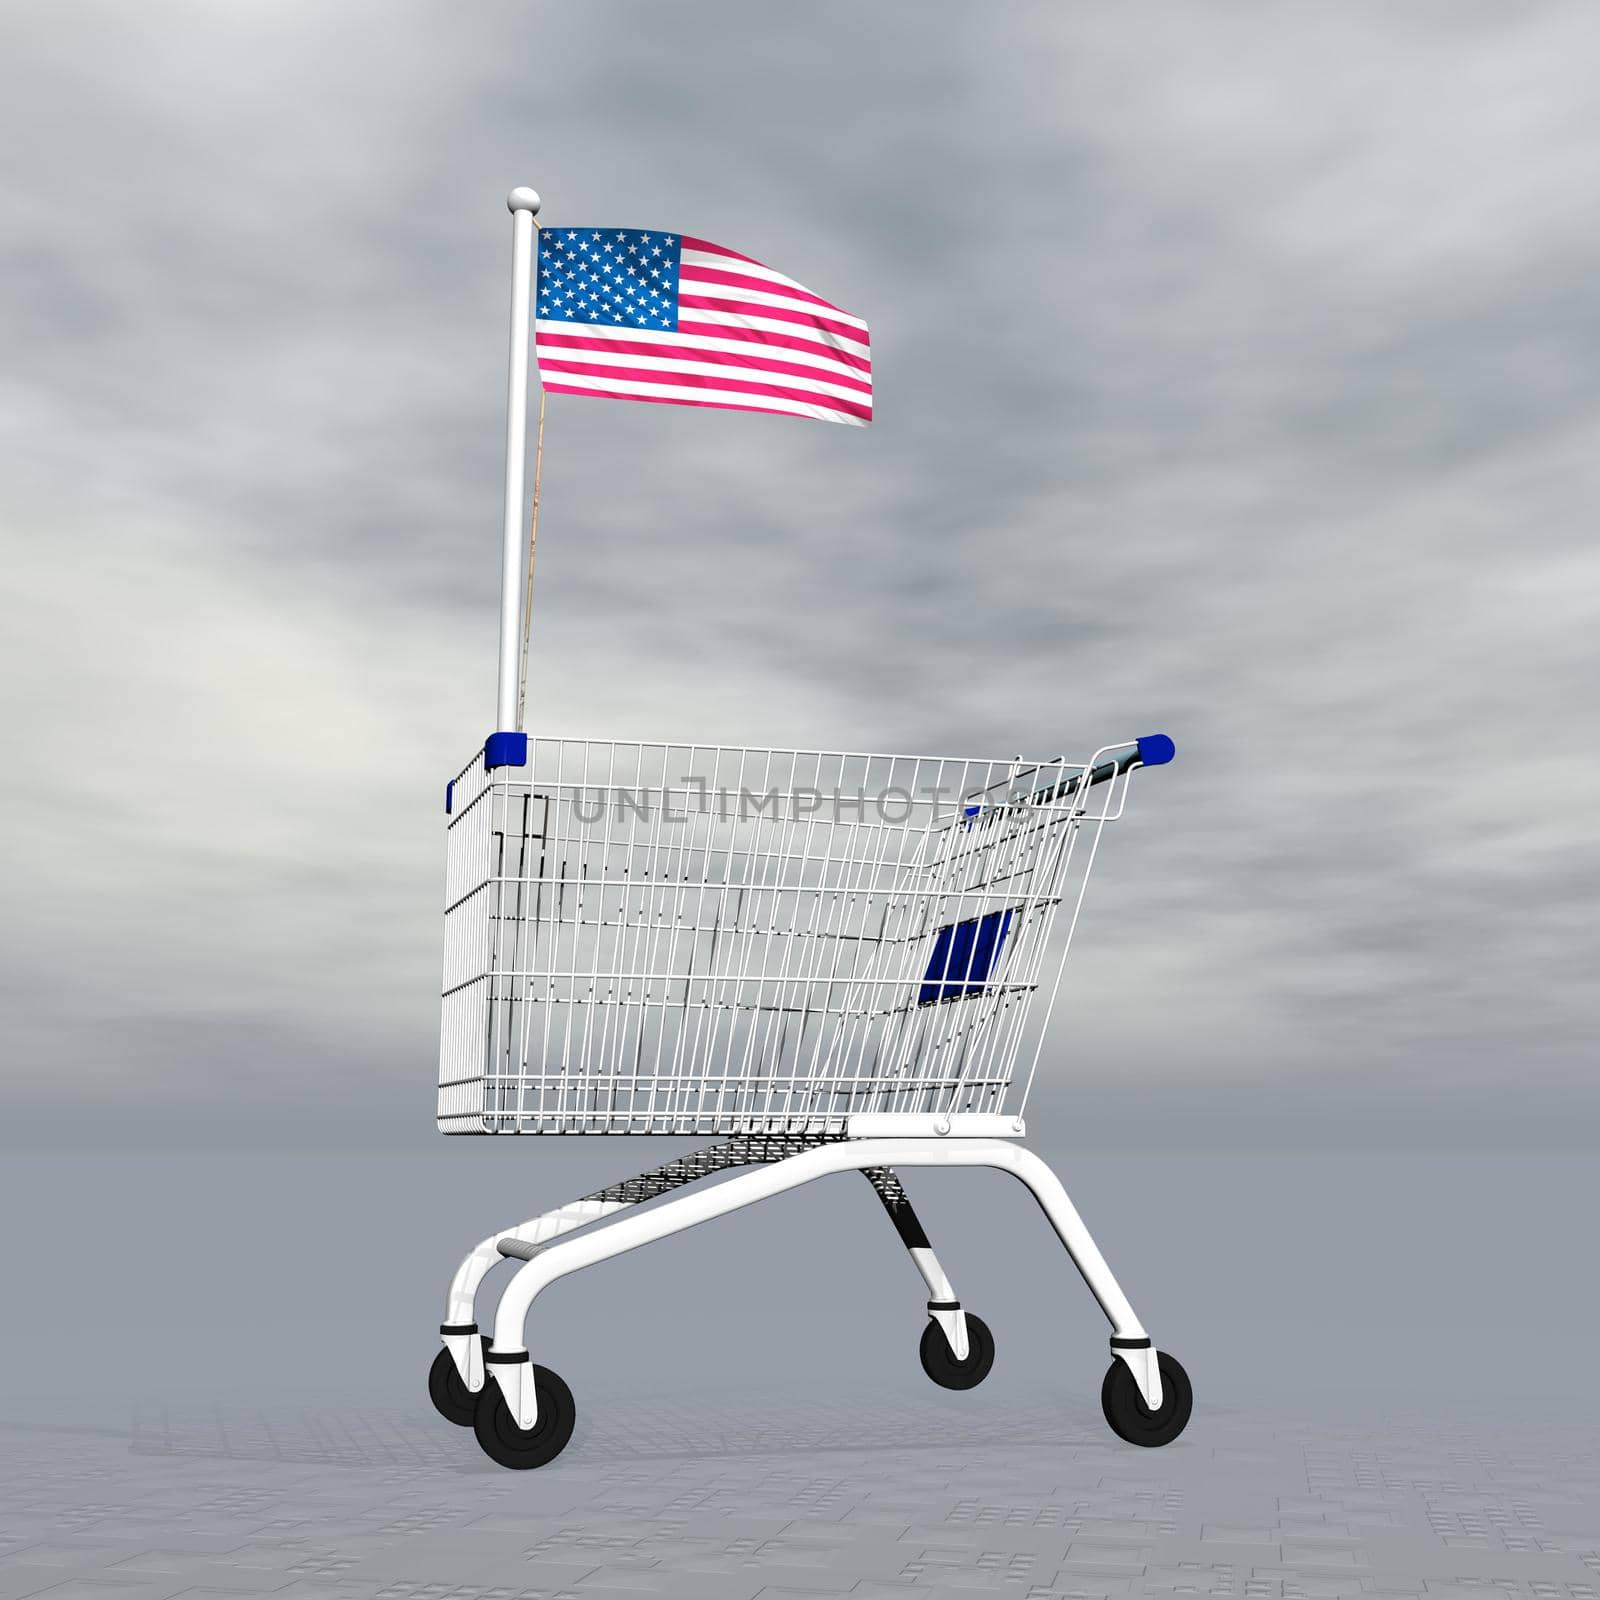 Shopping cart holding american flag to symbolize commerce in United States into grey cloudy background